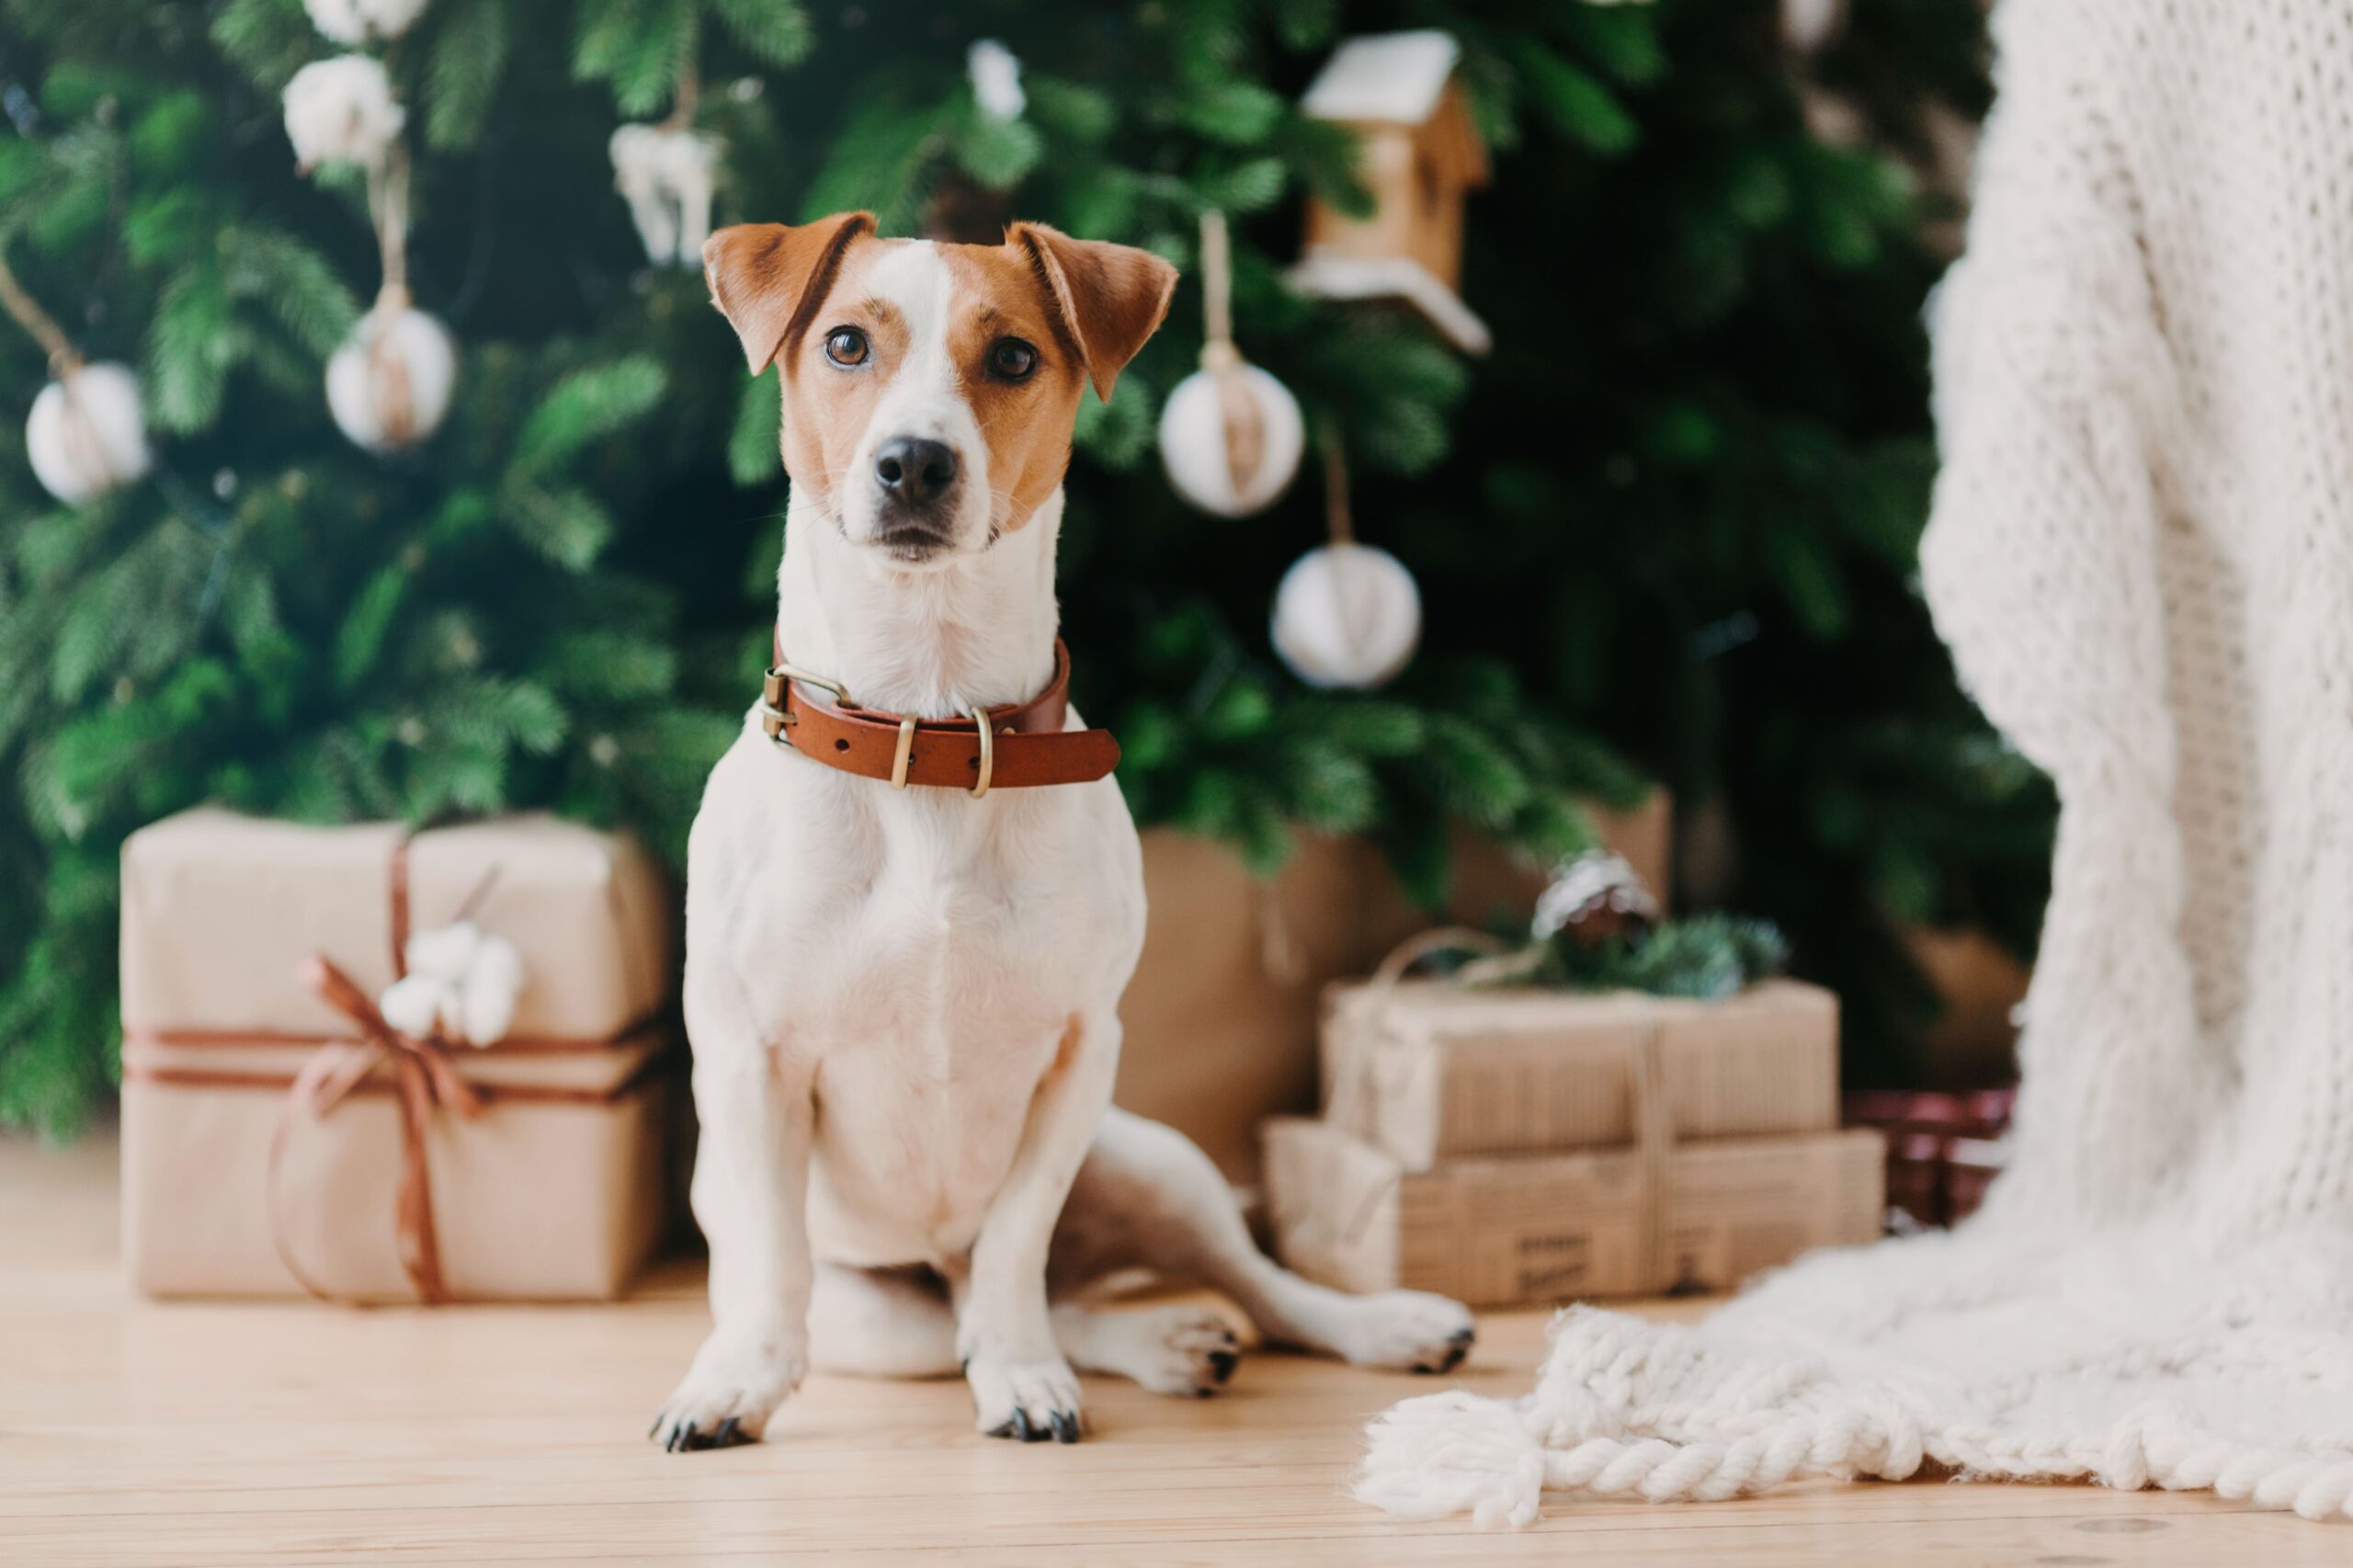 Best Dog Christmas Gifts